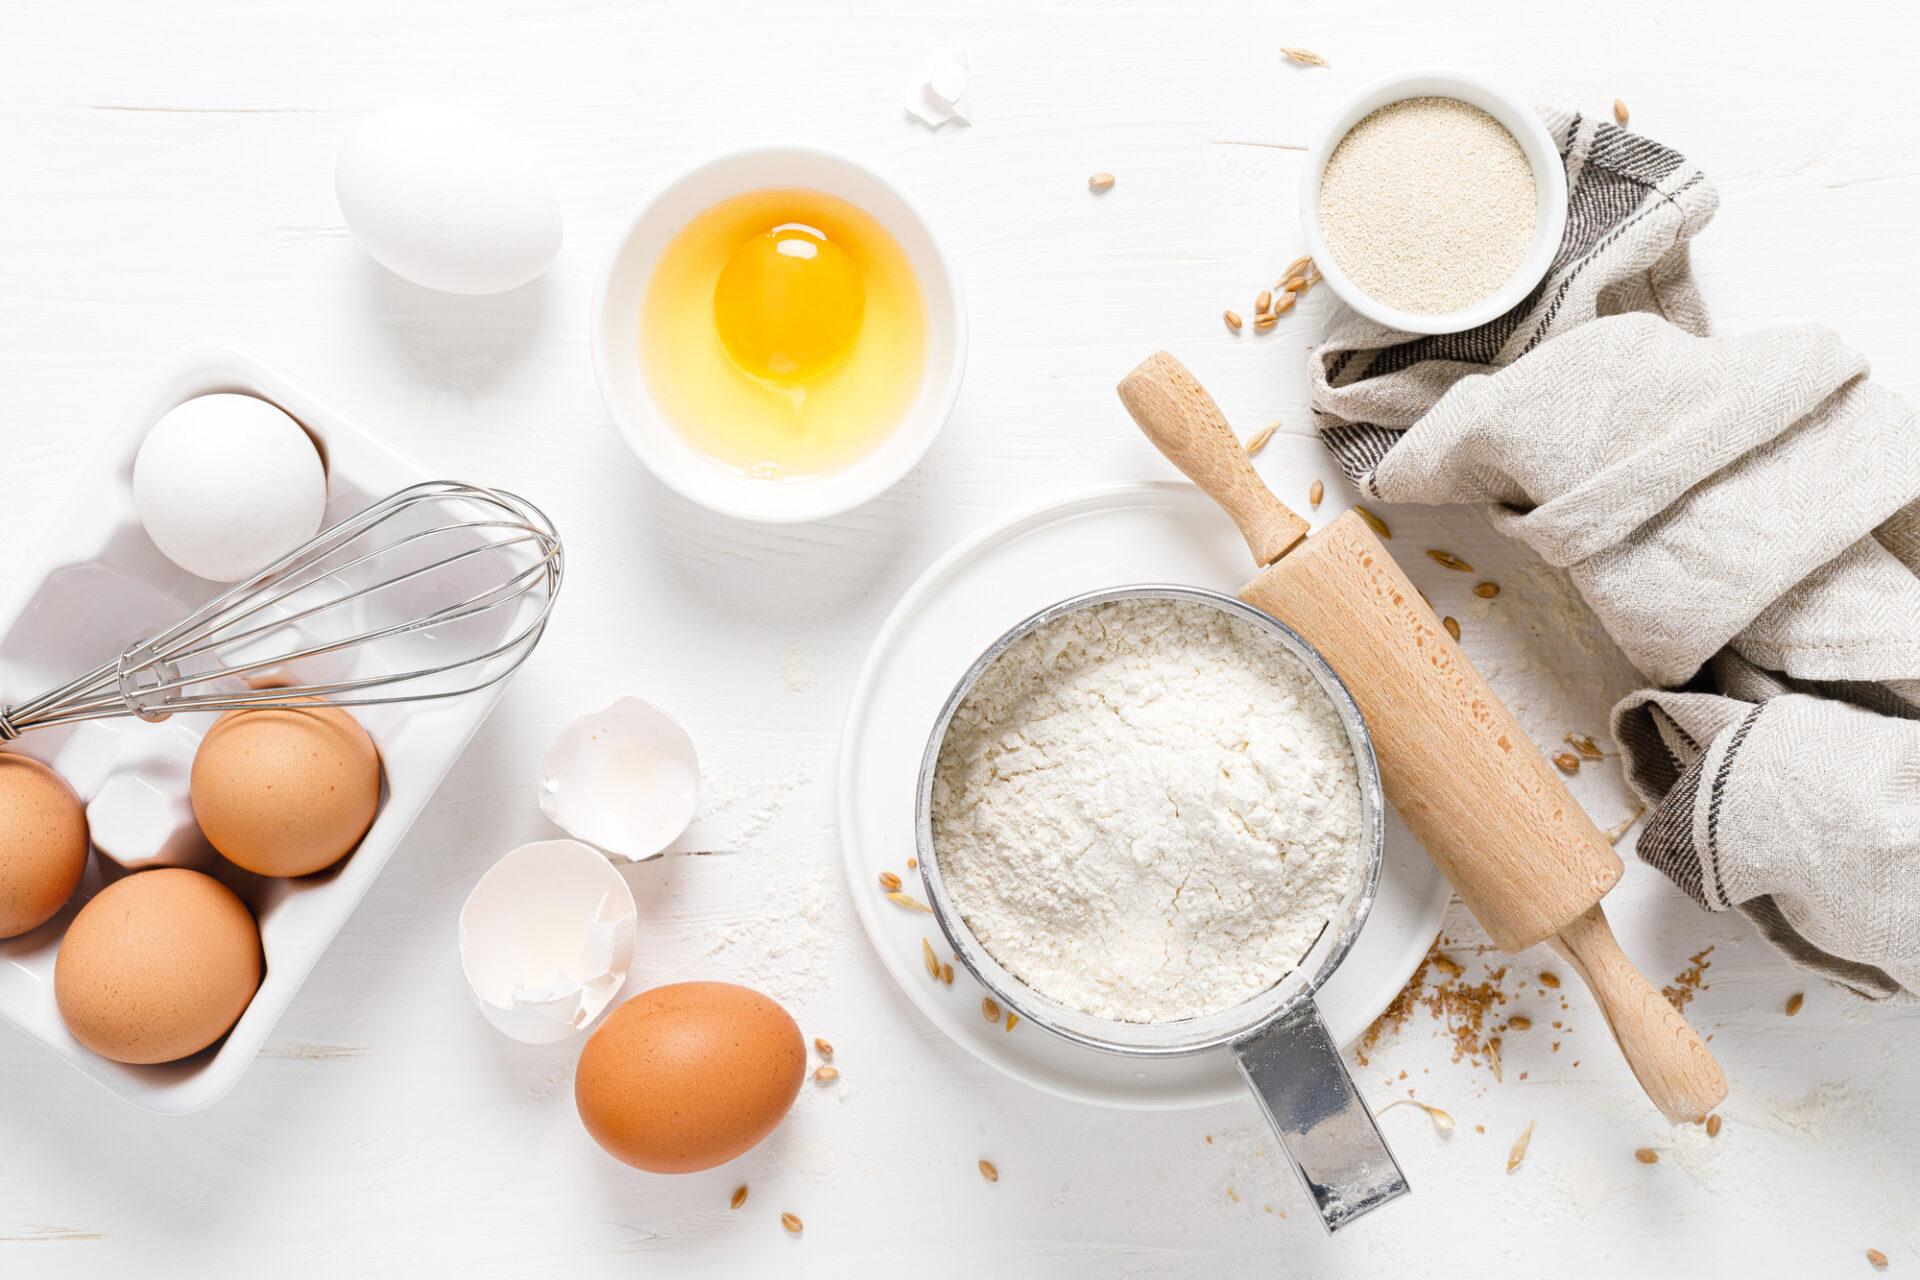 baking homemade bread on white kitchen worktop with ingredients for cooking, culinary background, copy space, overhead view